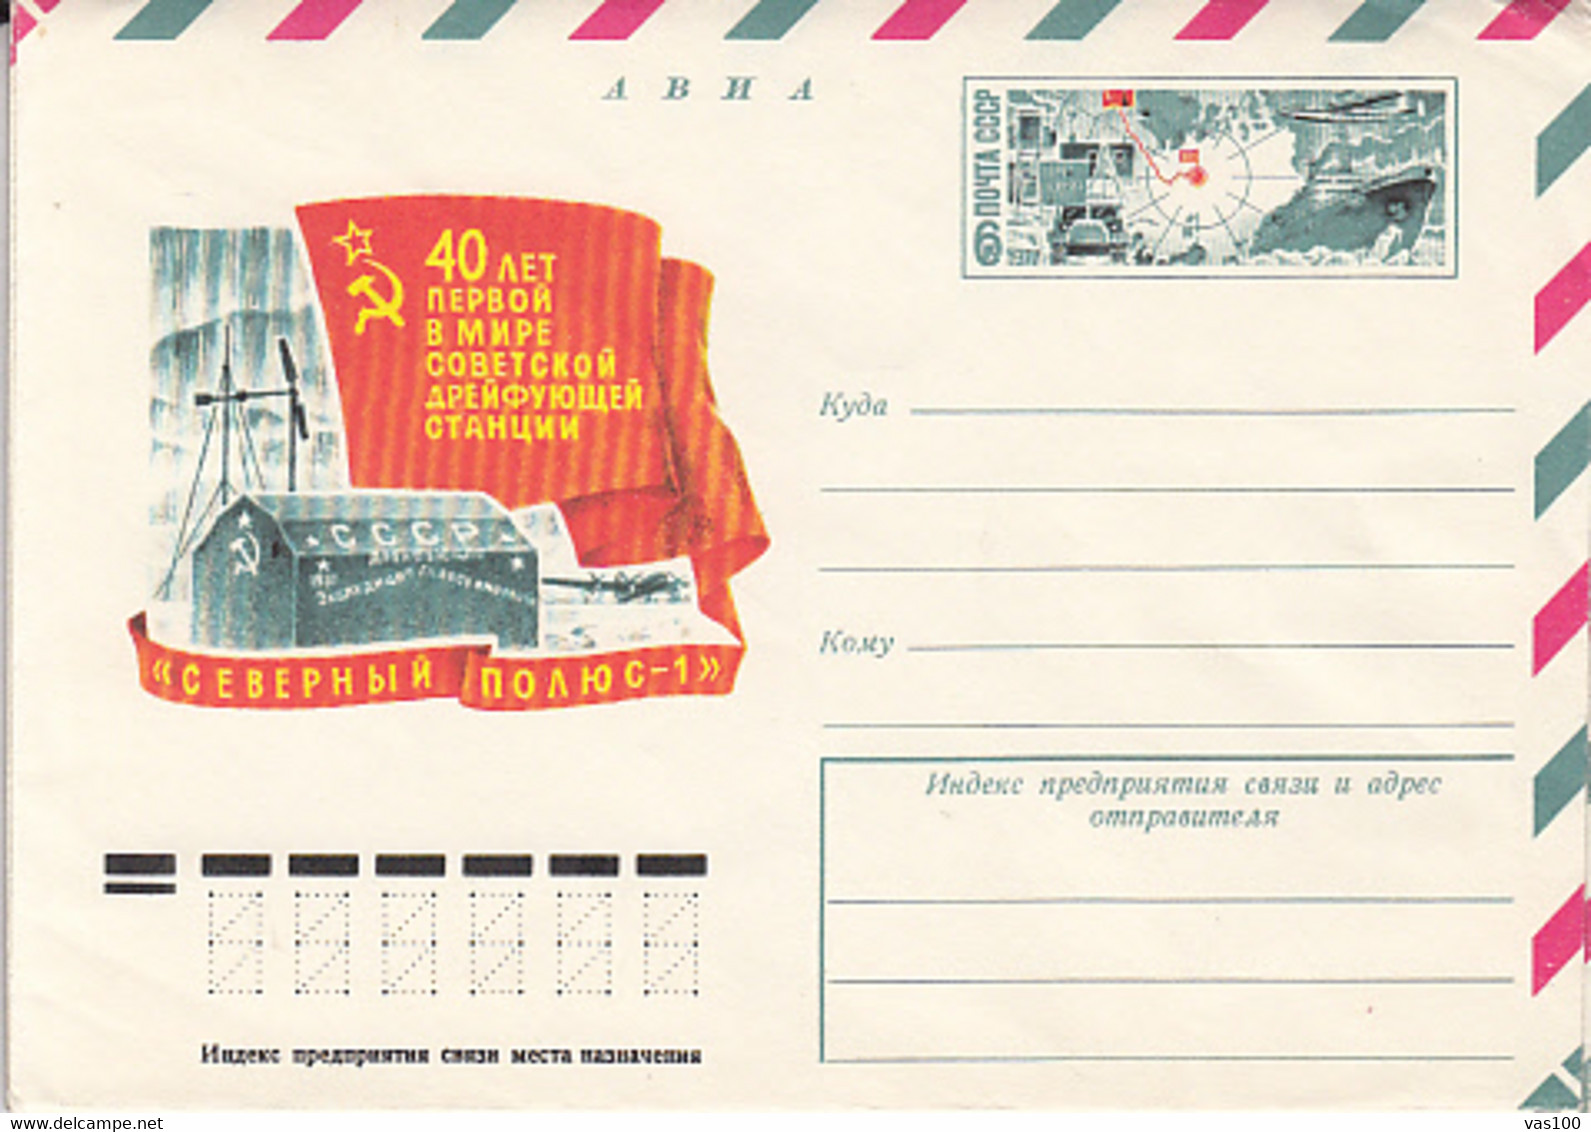 NORTH POLE, ARCTIC STATIONS, NORTH POLE 1, COVER STATIONERY, ENTIER POSTAL, 1977, RUSSIA - Forschungsstationen & Arctic Driftstationen